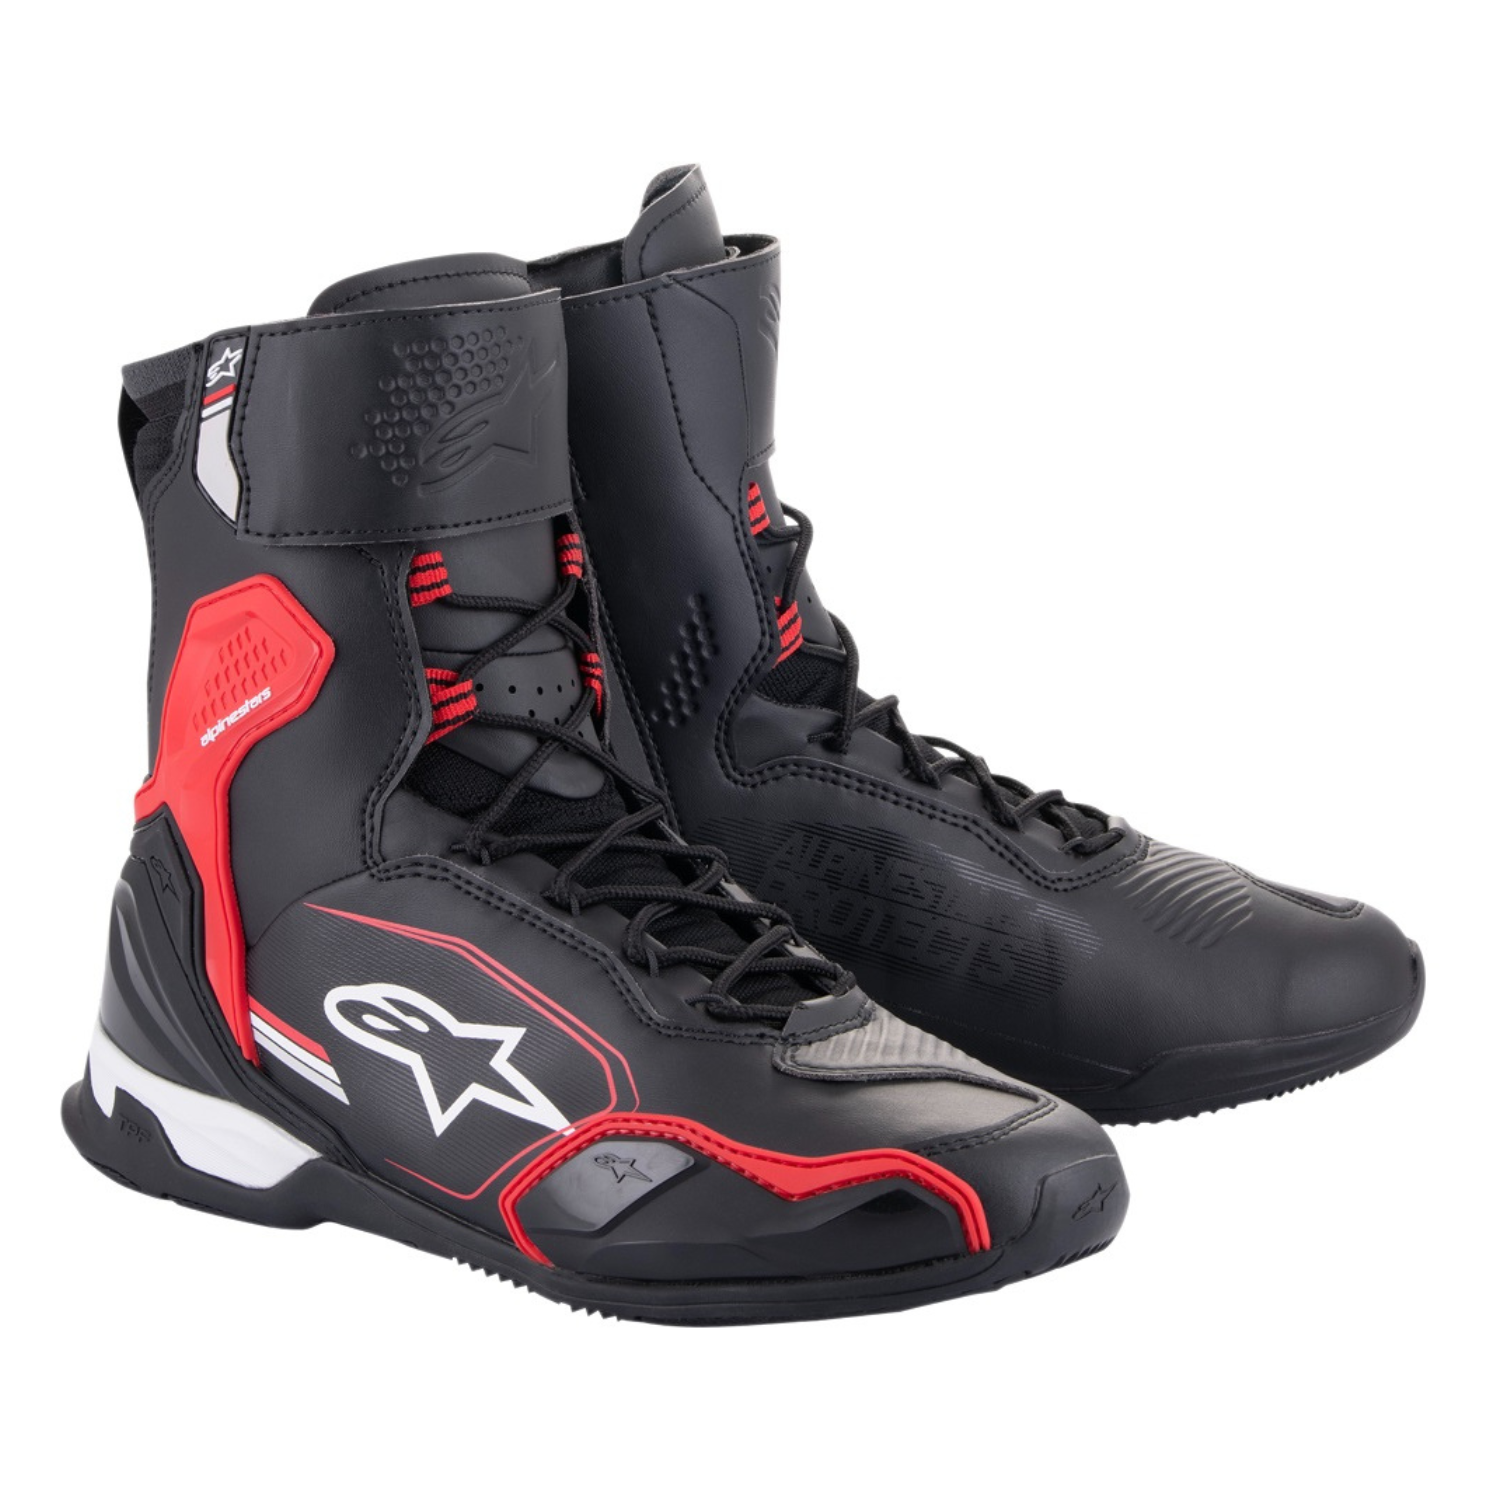 Image of Alpinestars Superfaster Shoes Black Bright Red White Talla US 75